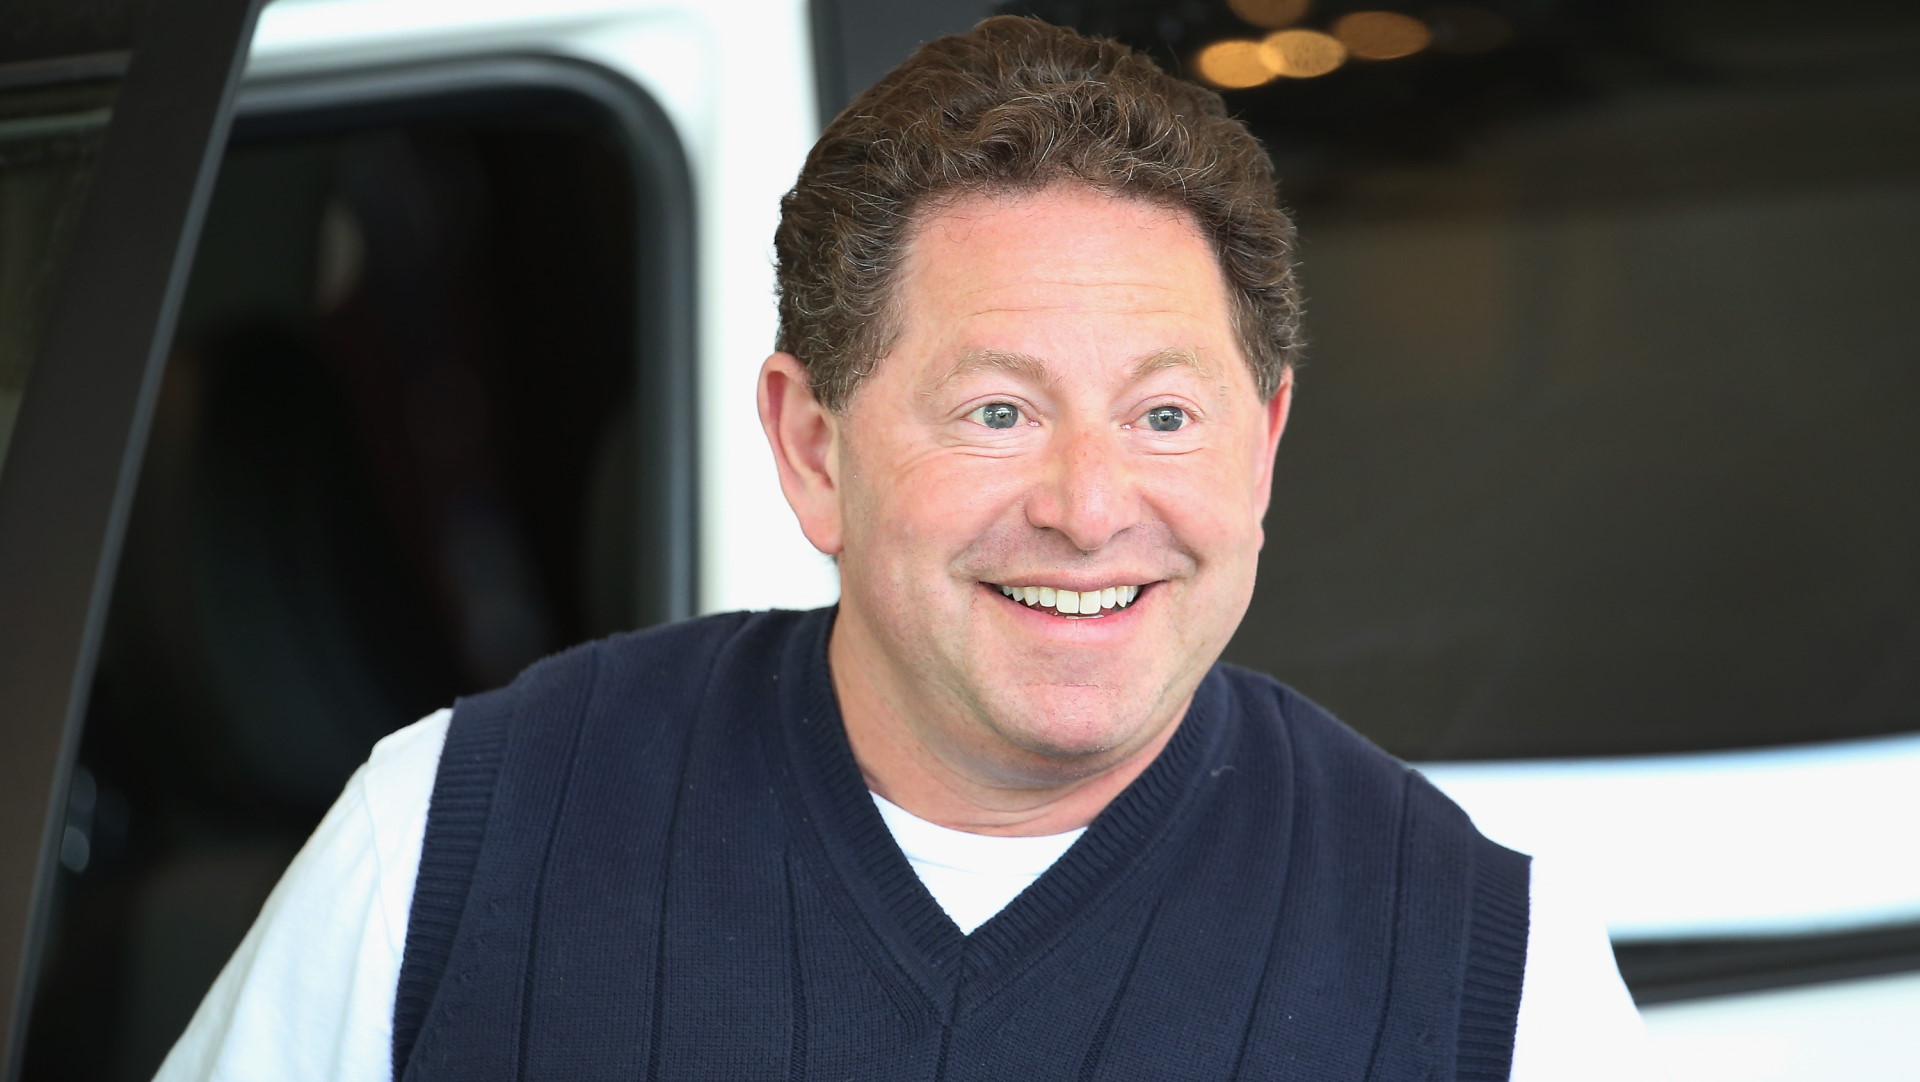 Hundreds Of Activision Blizzard Employees Sign Petition Demanding Bobby Kotick's Removal thumbnail